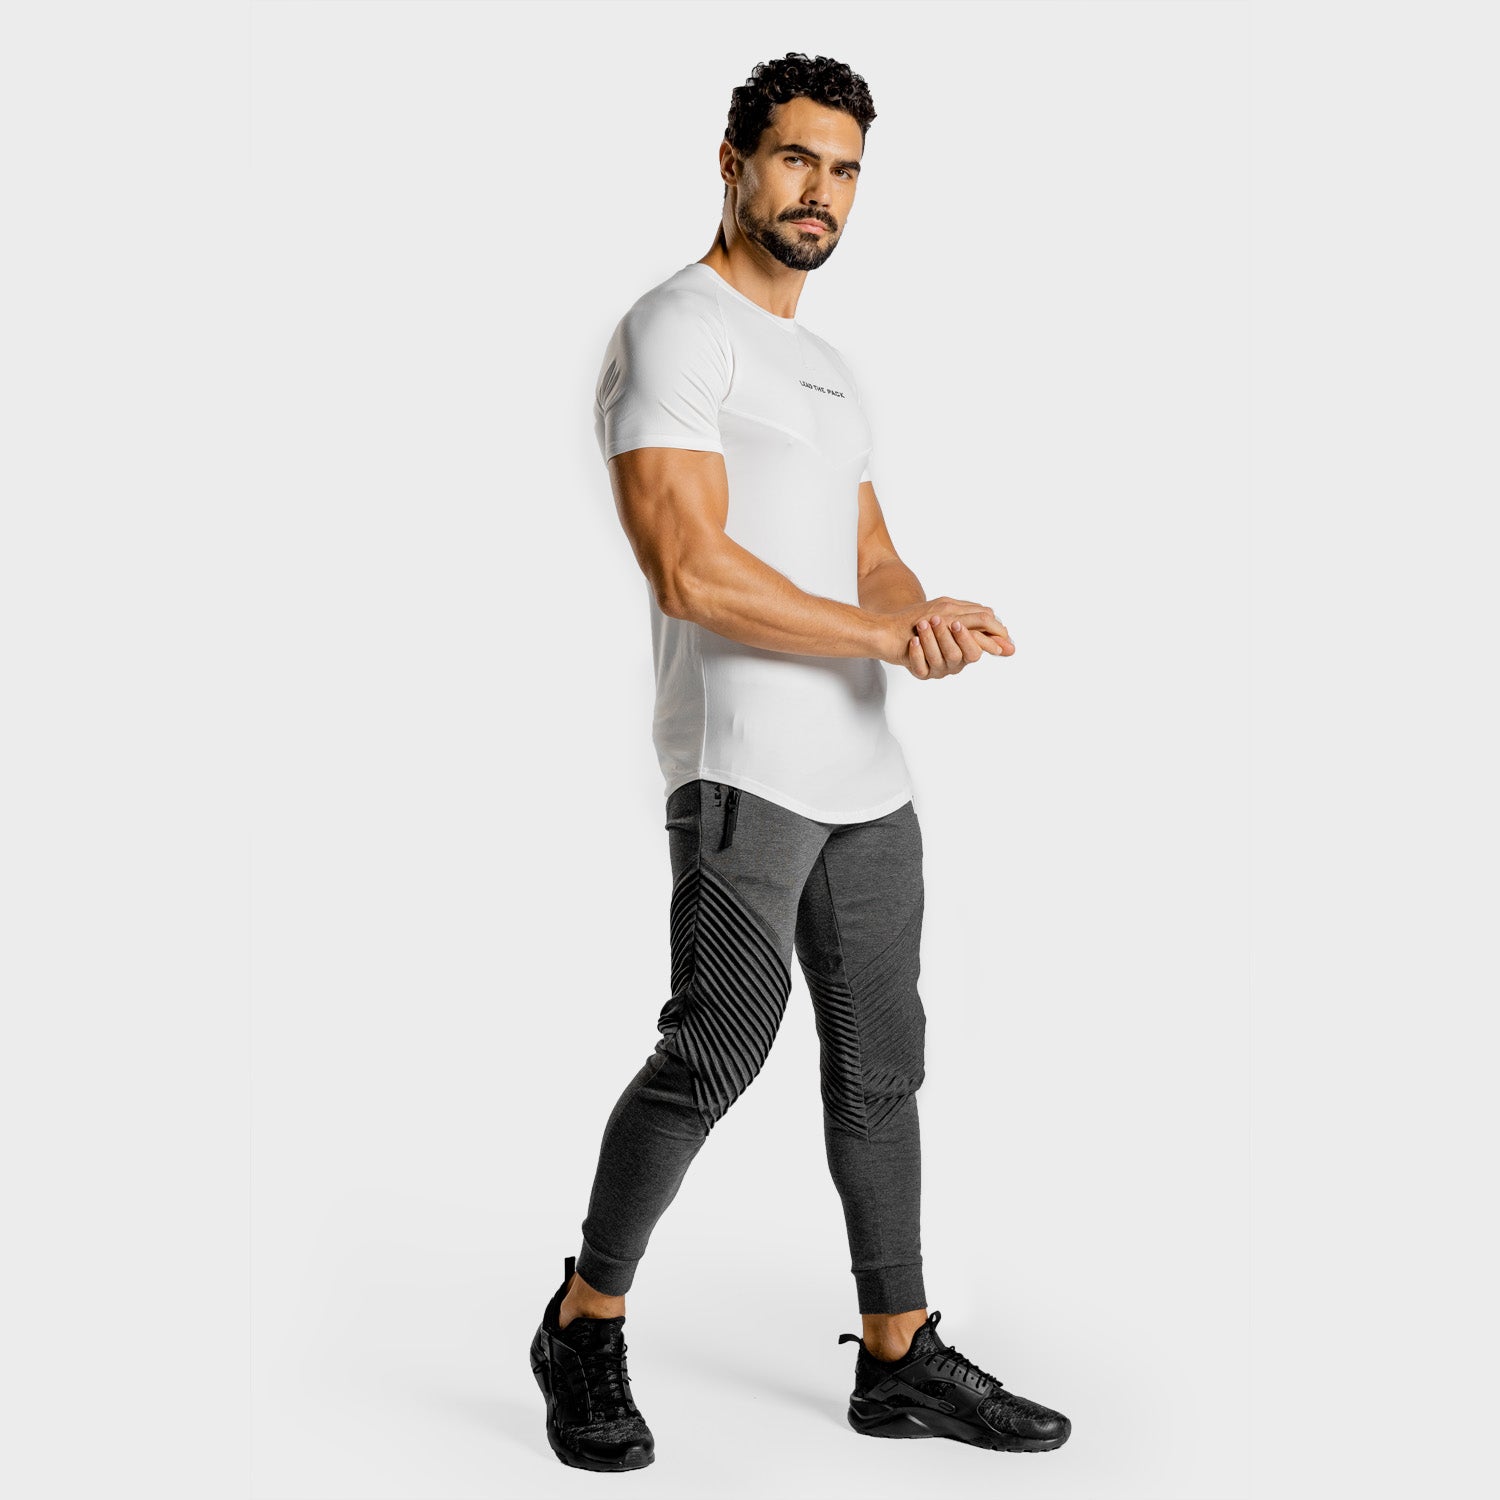 squatwolf-workout-pants-for-men-statement-classic-joggers-grey-gym-wear